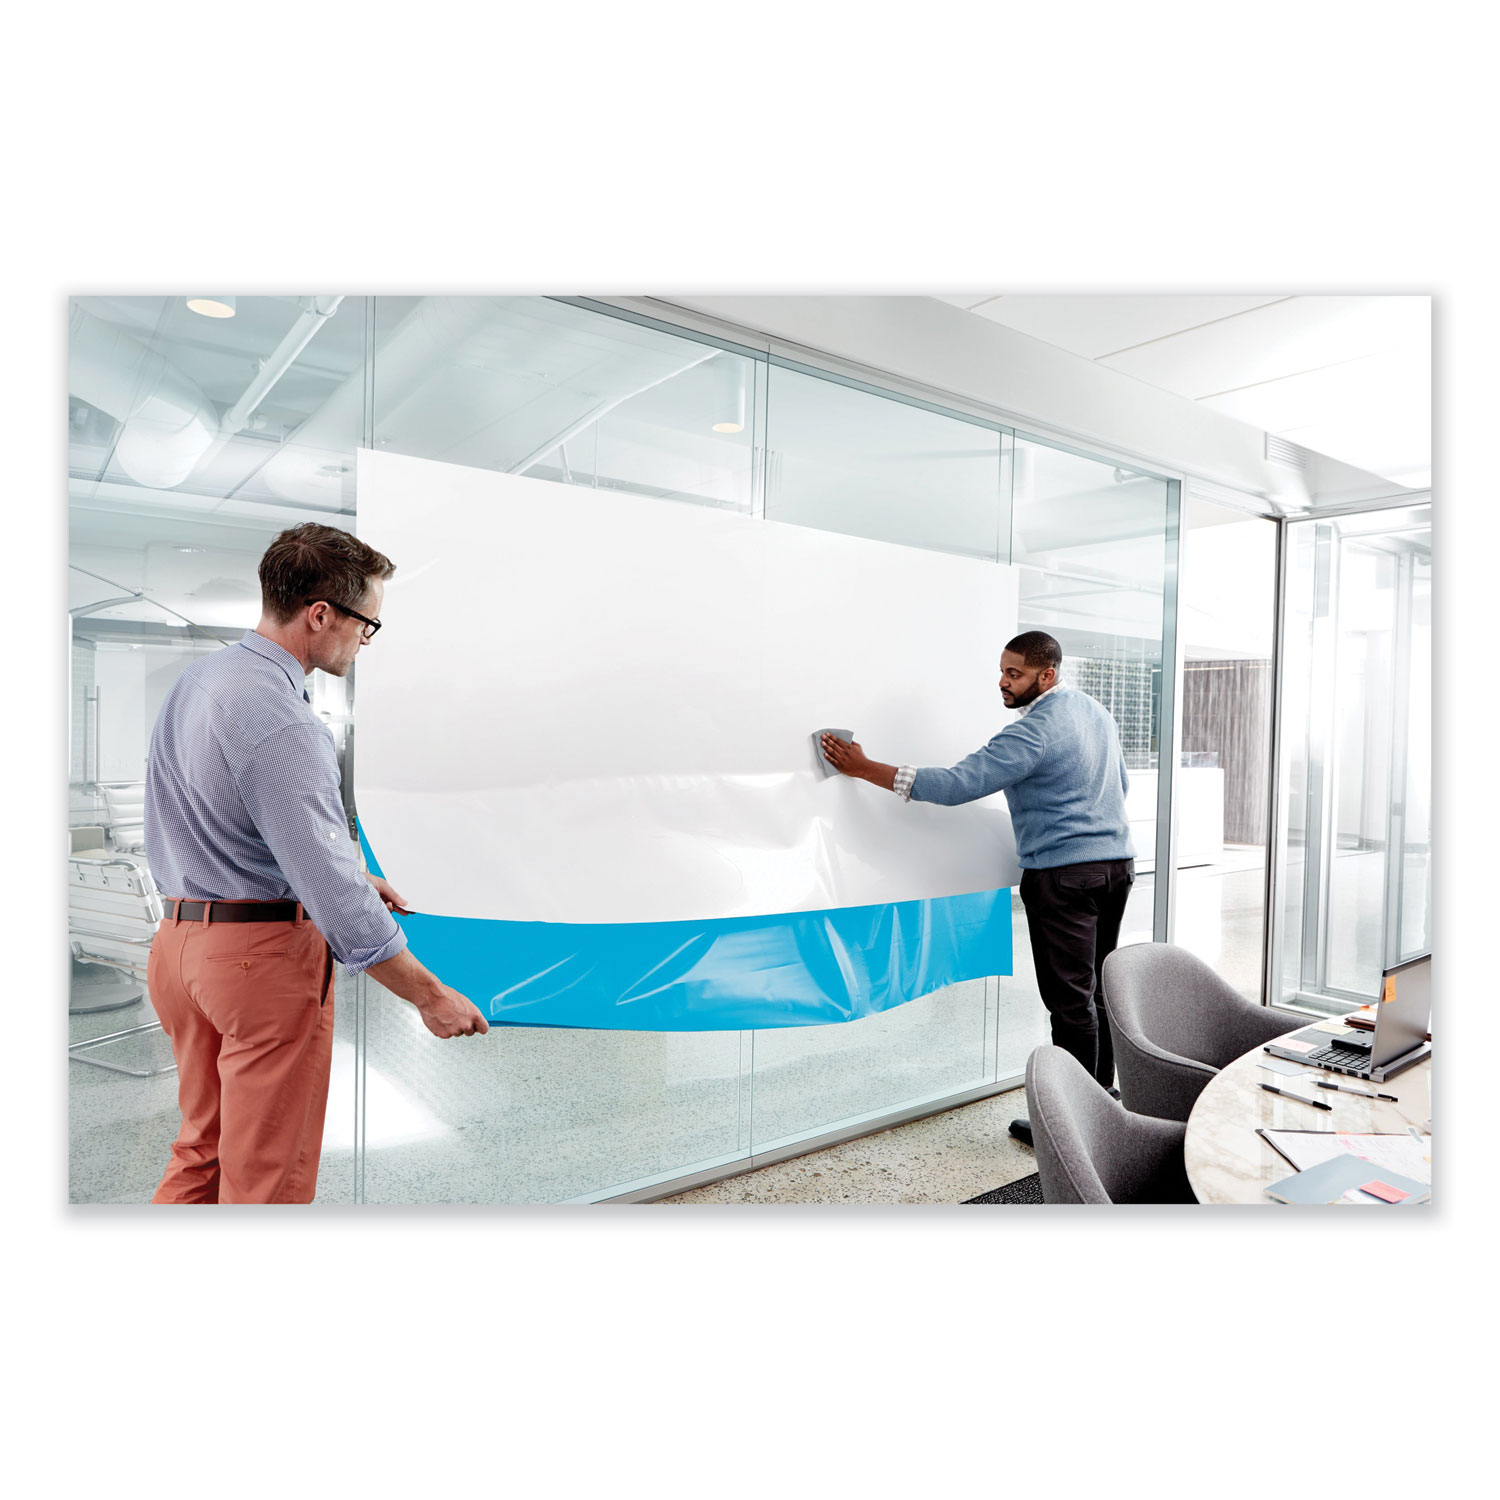 72 x 48 White Dry Erase Surface with Adhesive Backing 